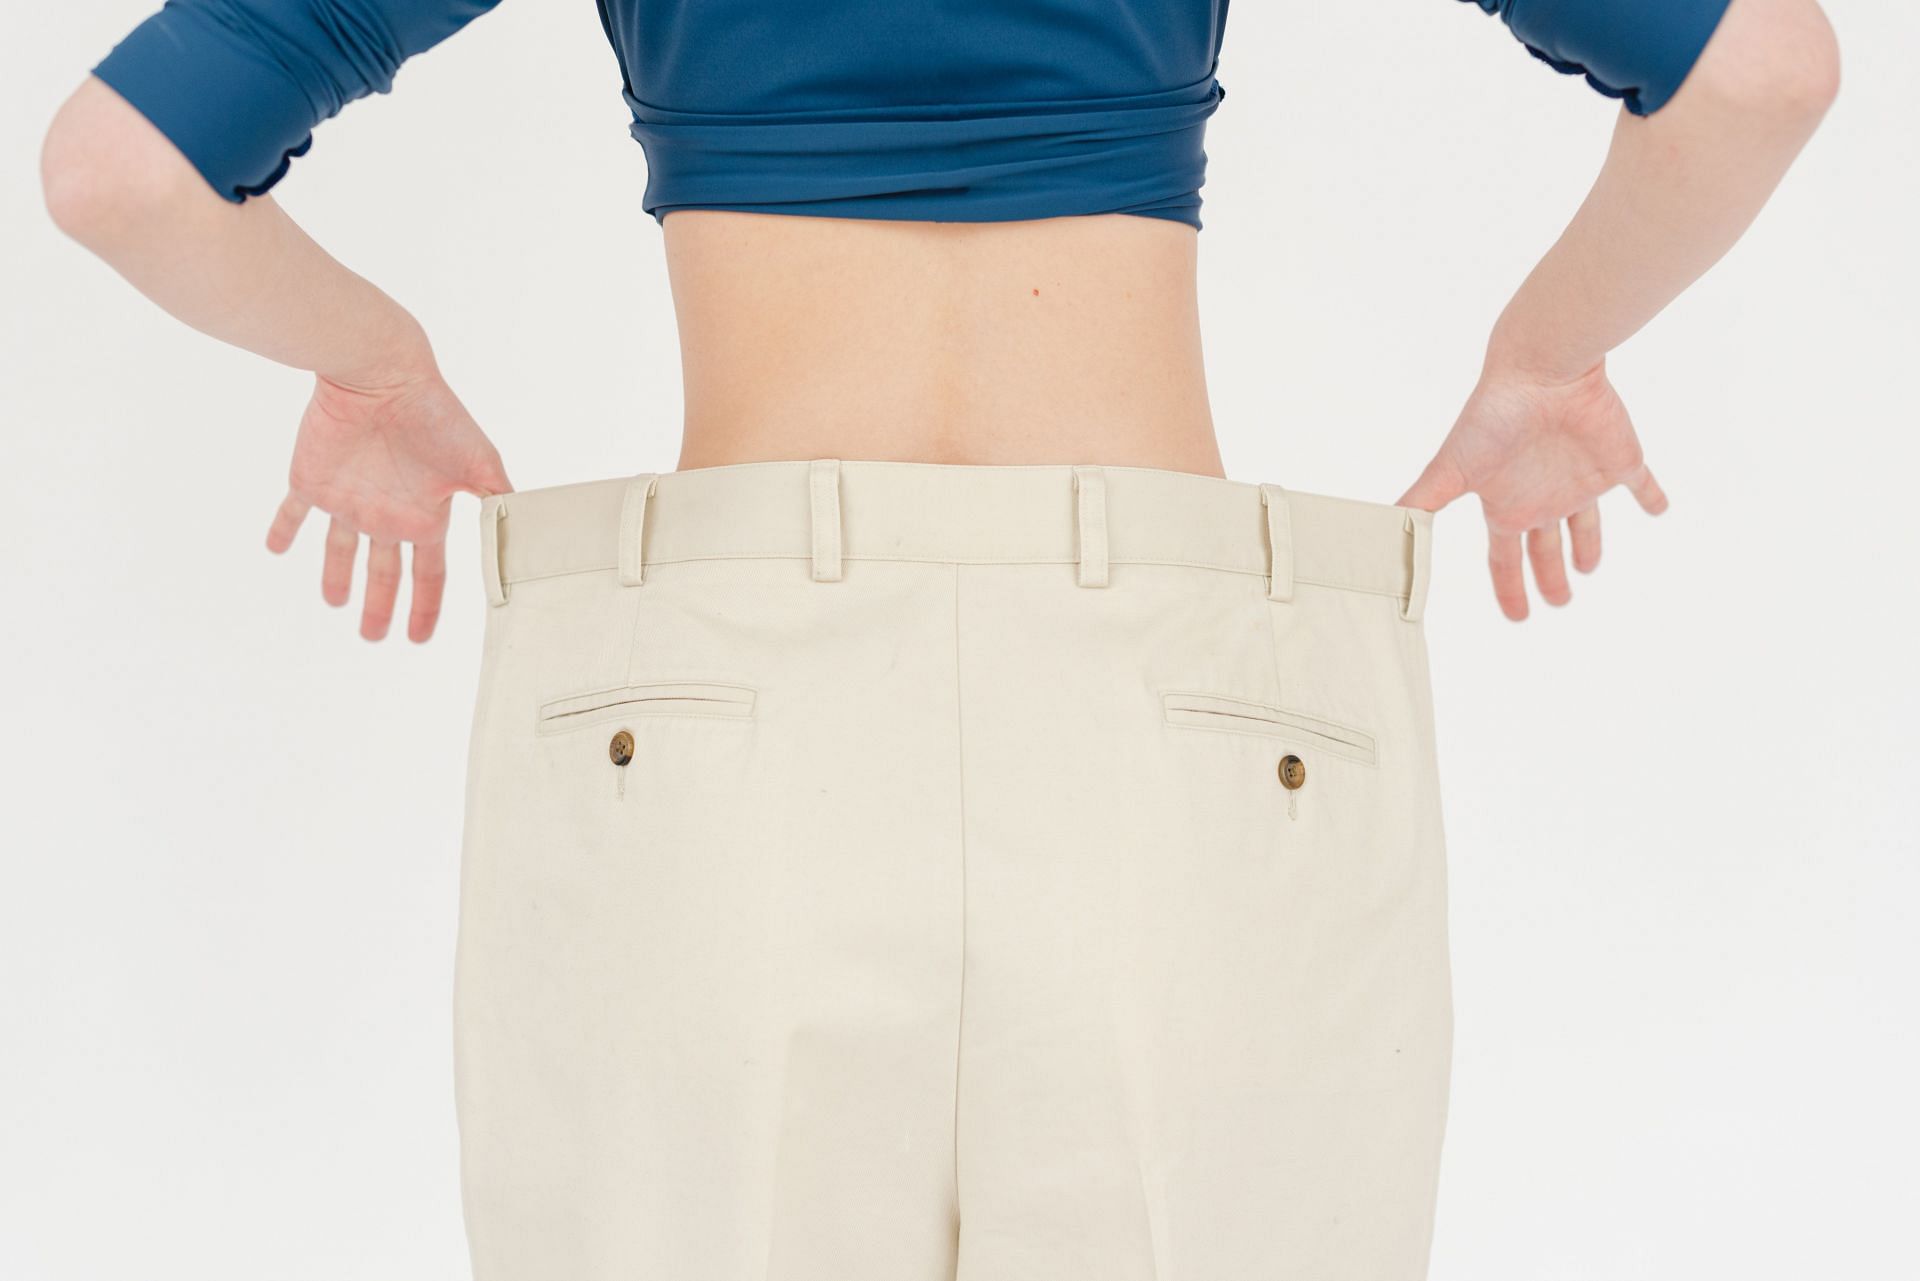 Actual fat is left unaffected by laxatives. (Image via Pexels/Shvets Production)